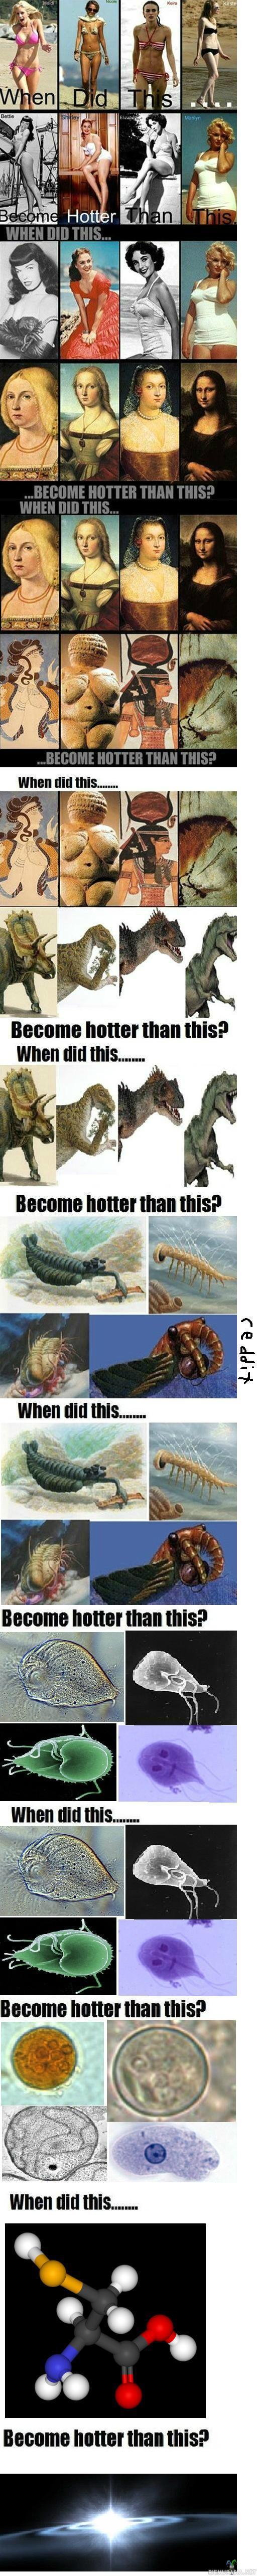 When did this become hotter than this? - we need to go deeper